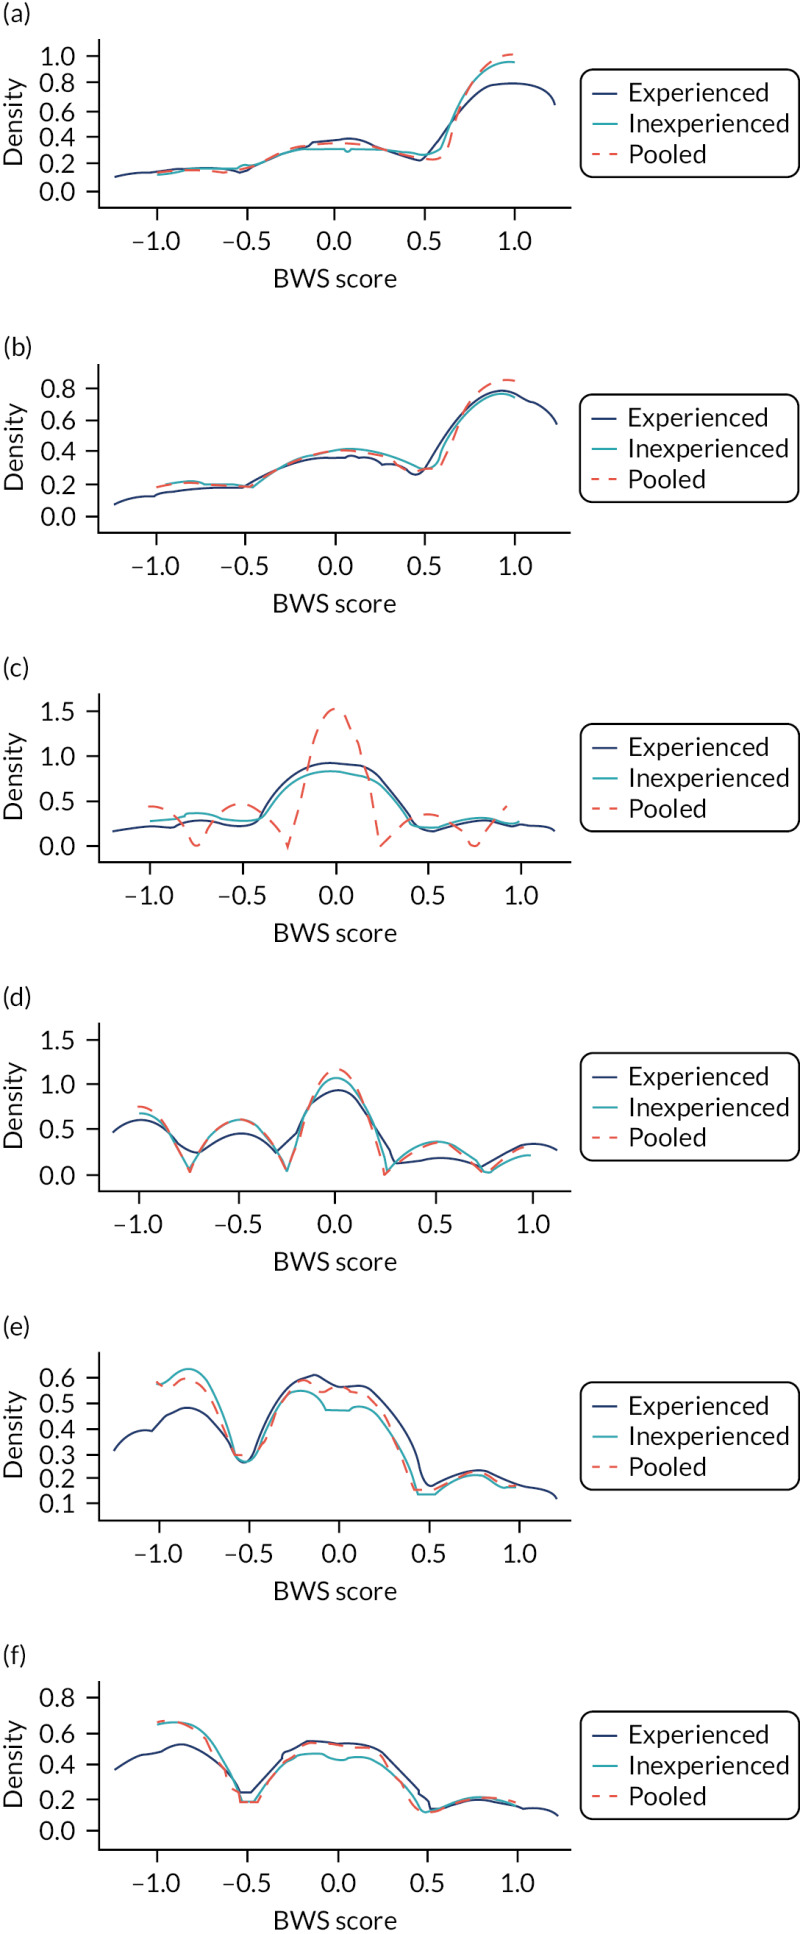 FIGURE 34. Kernel density plots showing distribution of BWS responses stratified by question context and respondent type: statins.